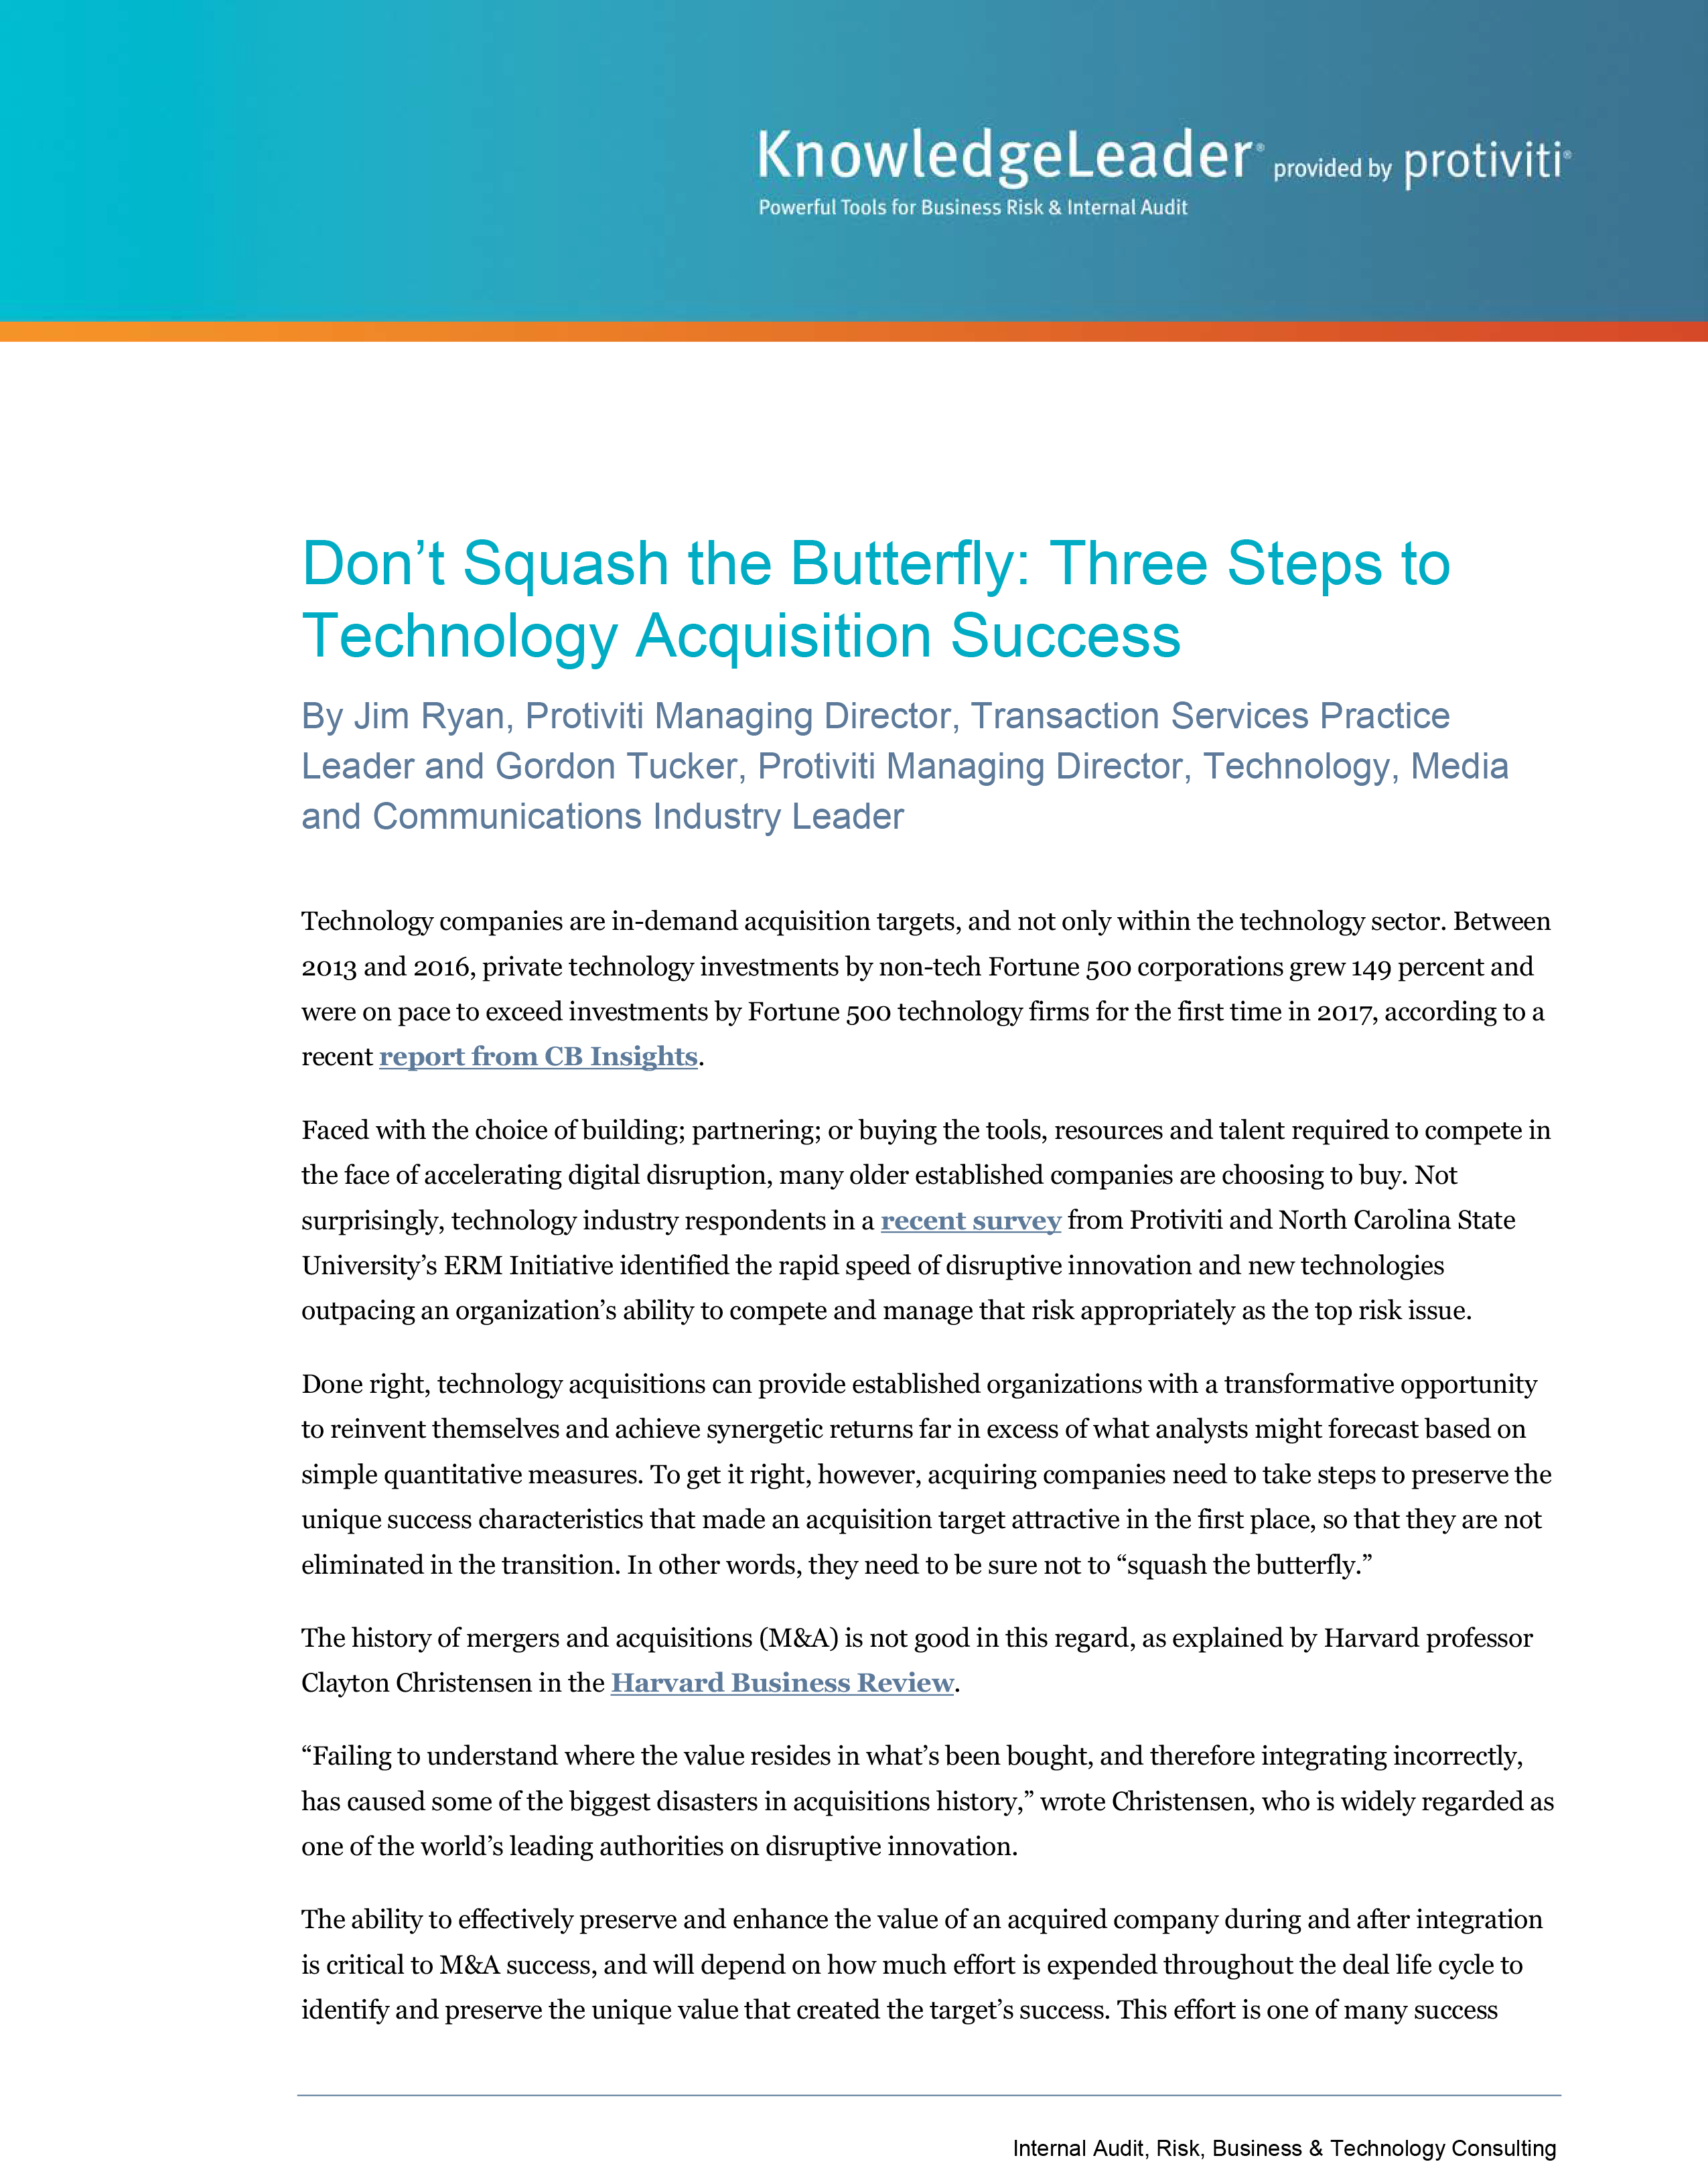 Screenshot of the first page of Don’t Squash the Butterfly - Three Steps to Technology Acquisition Success